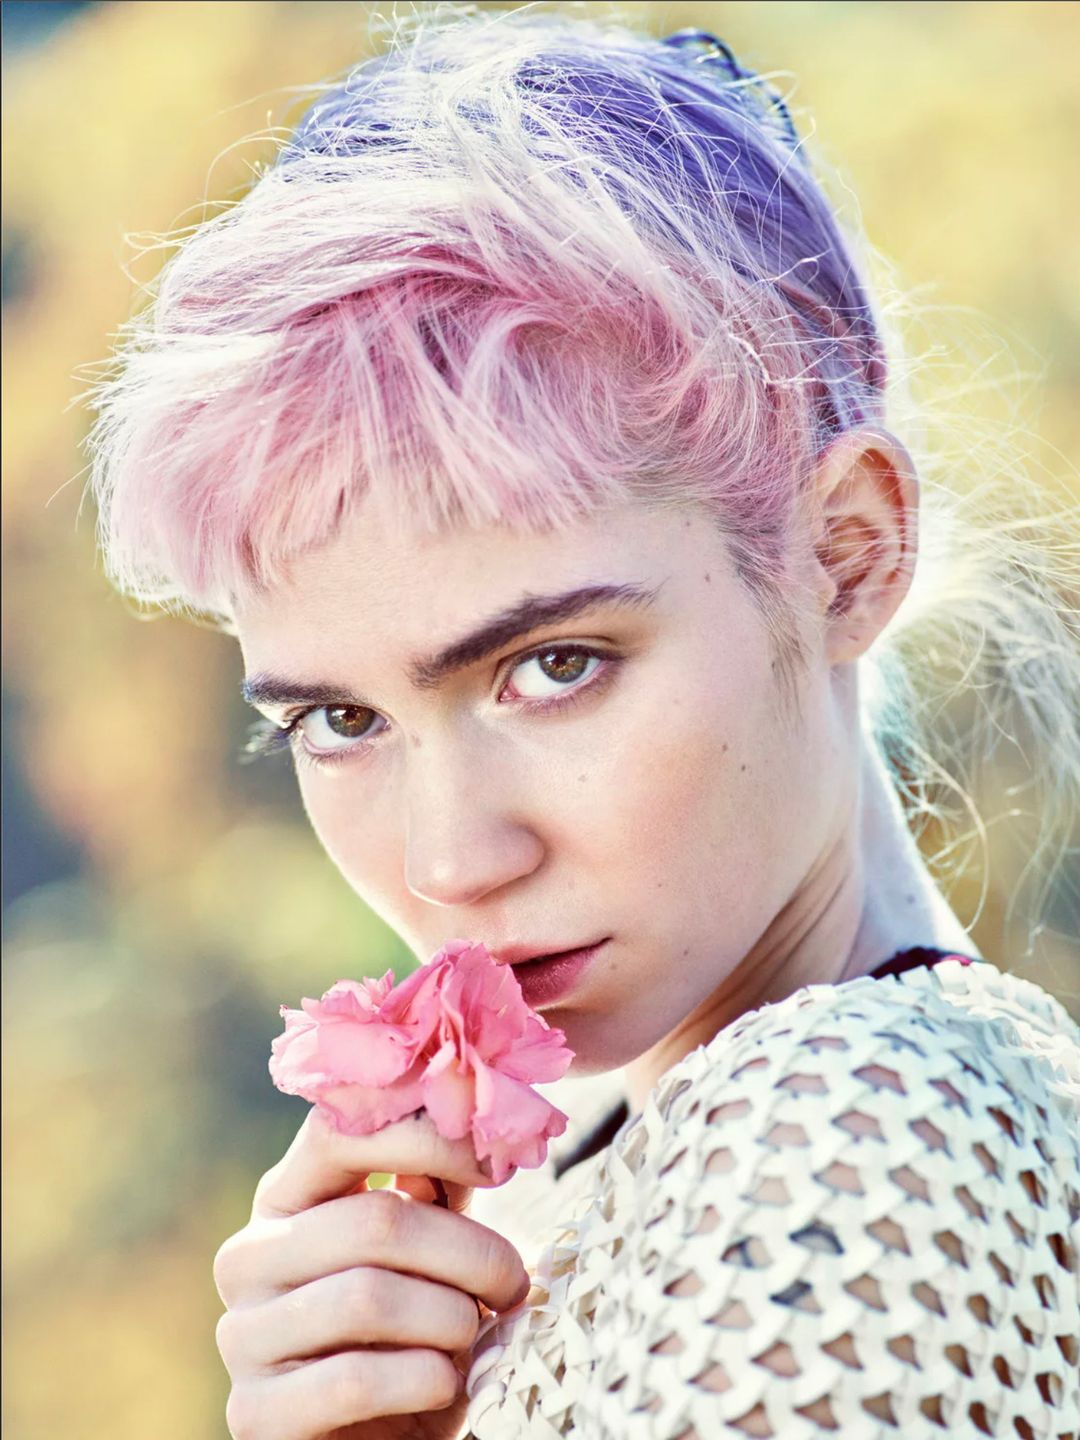 Grimes who are her parents